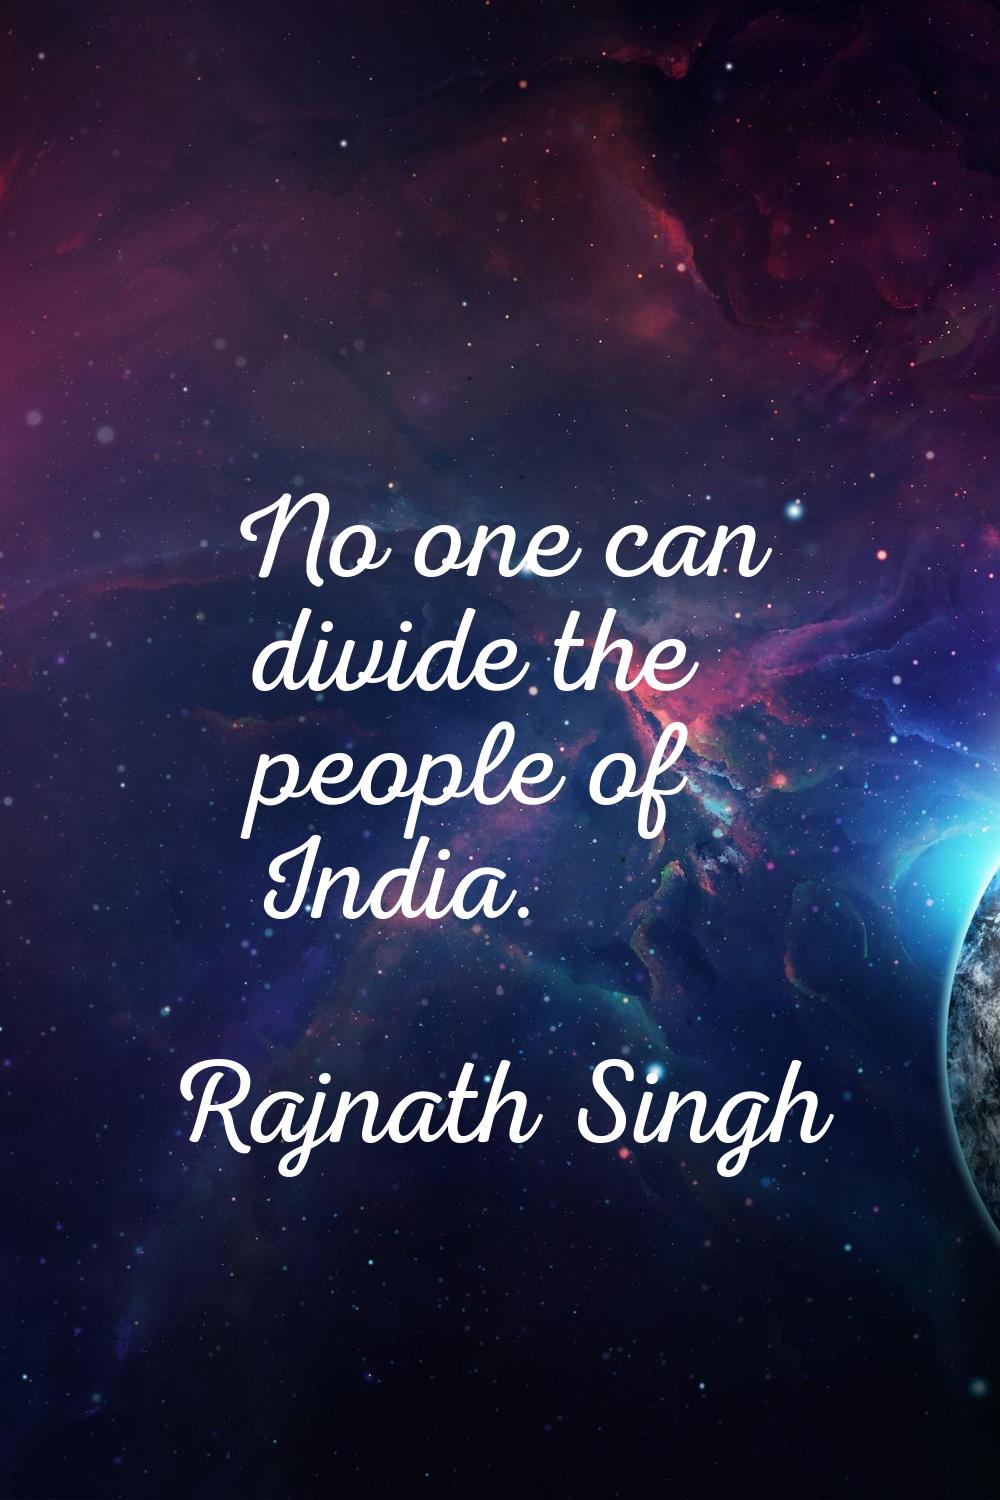 No one can divide the people of India.